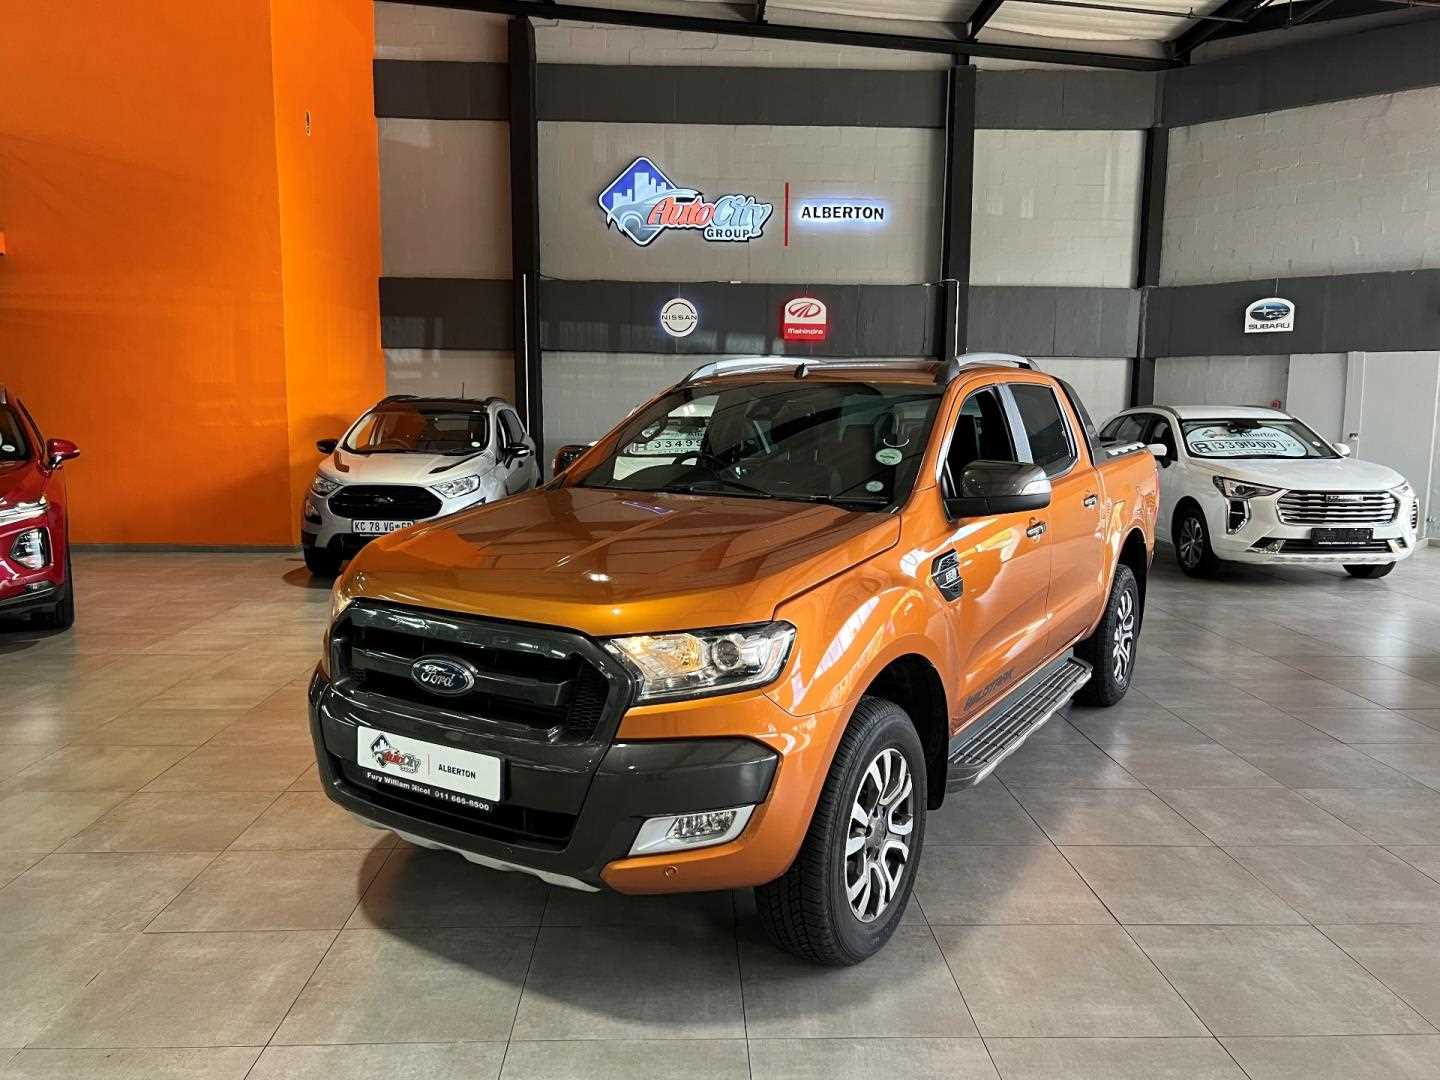 FORD RANGER 3.2TDCi WILDTRAK A/T P/U D/C for Sale in South Africa